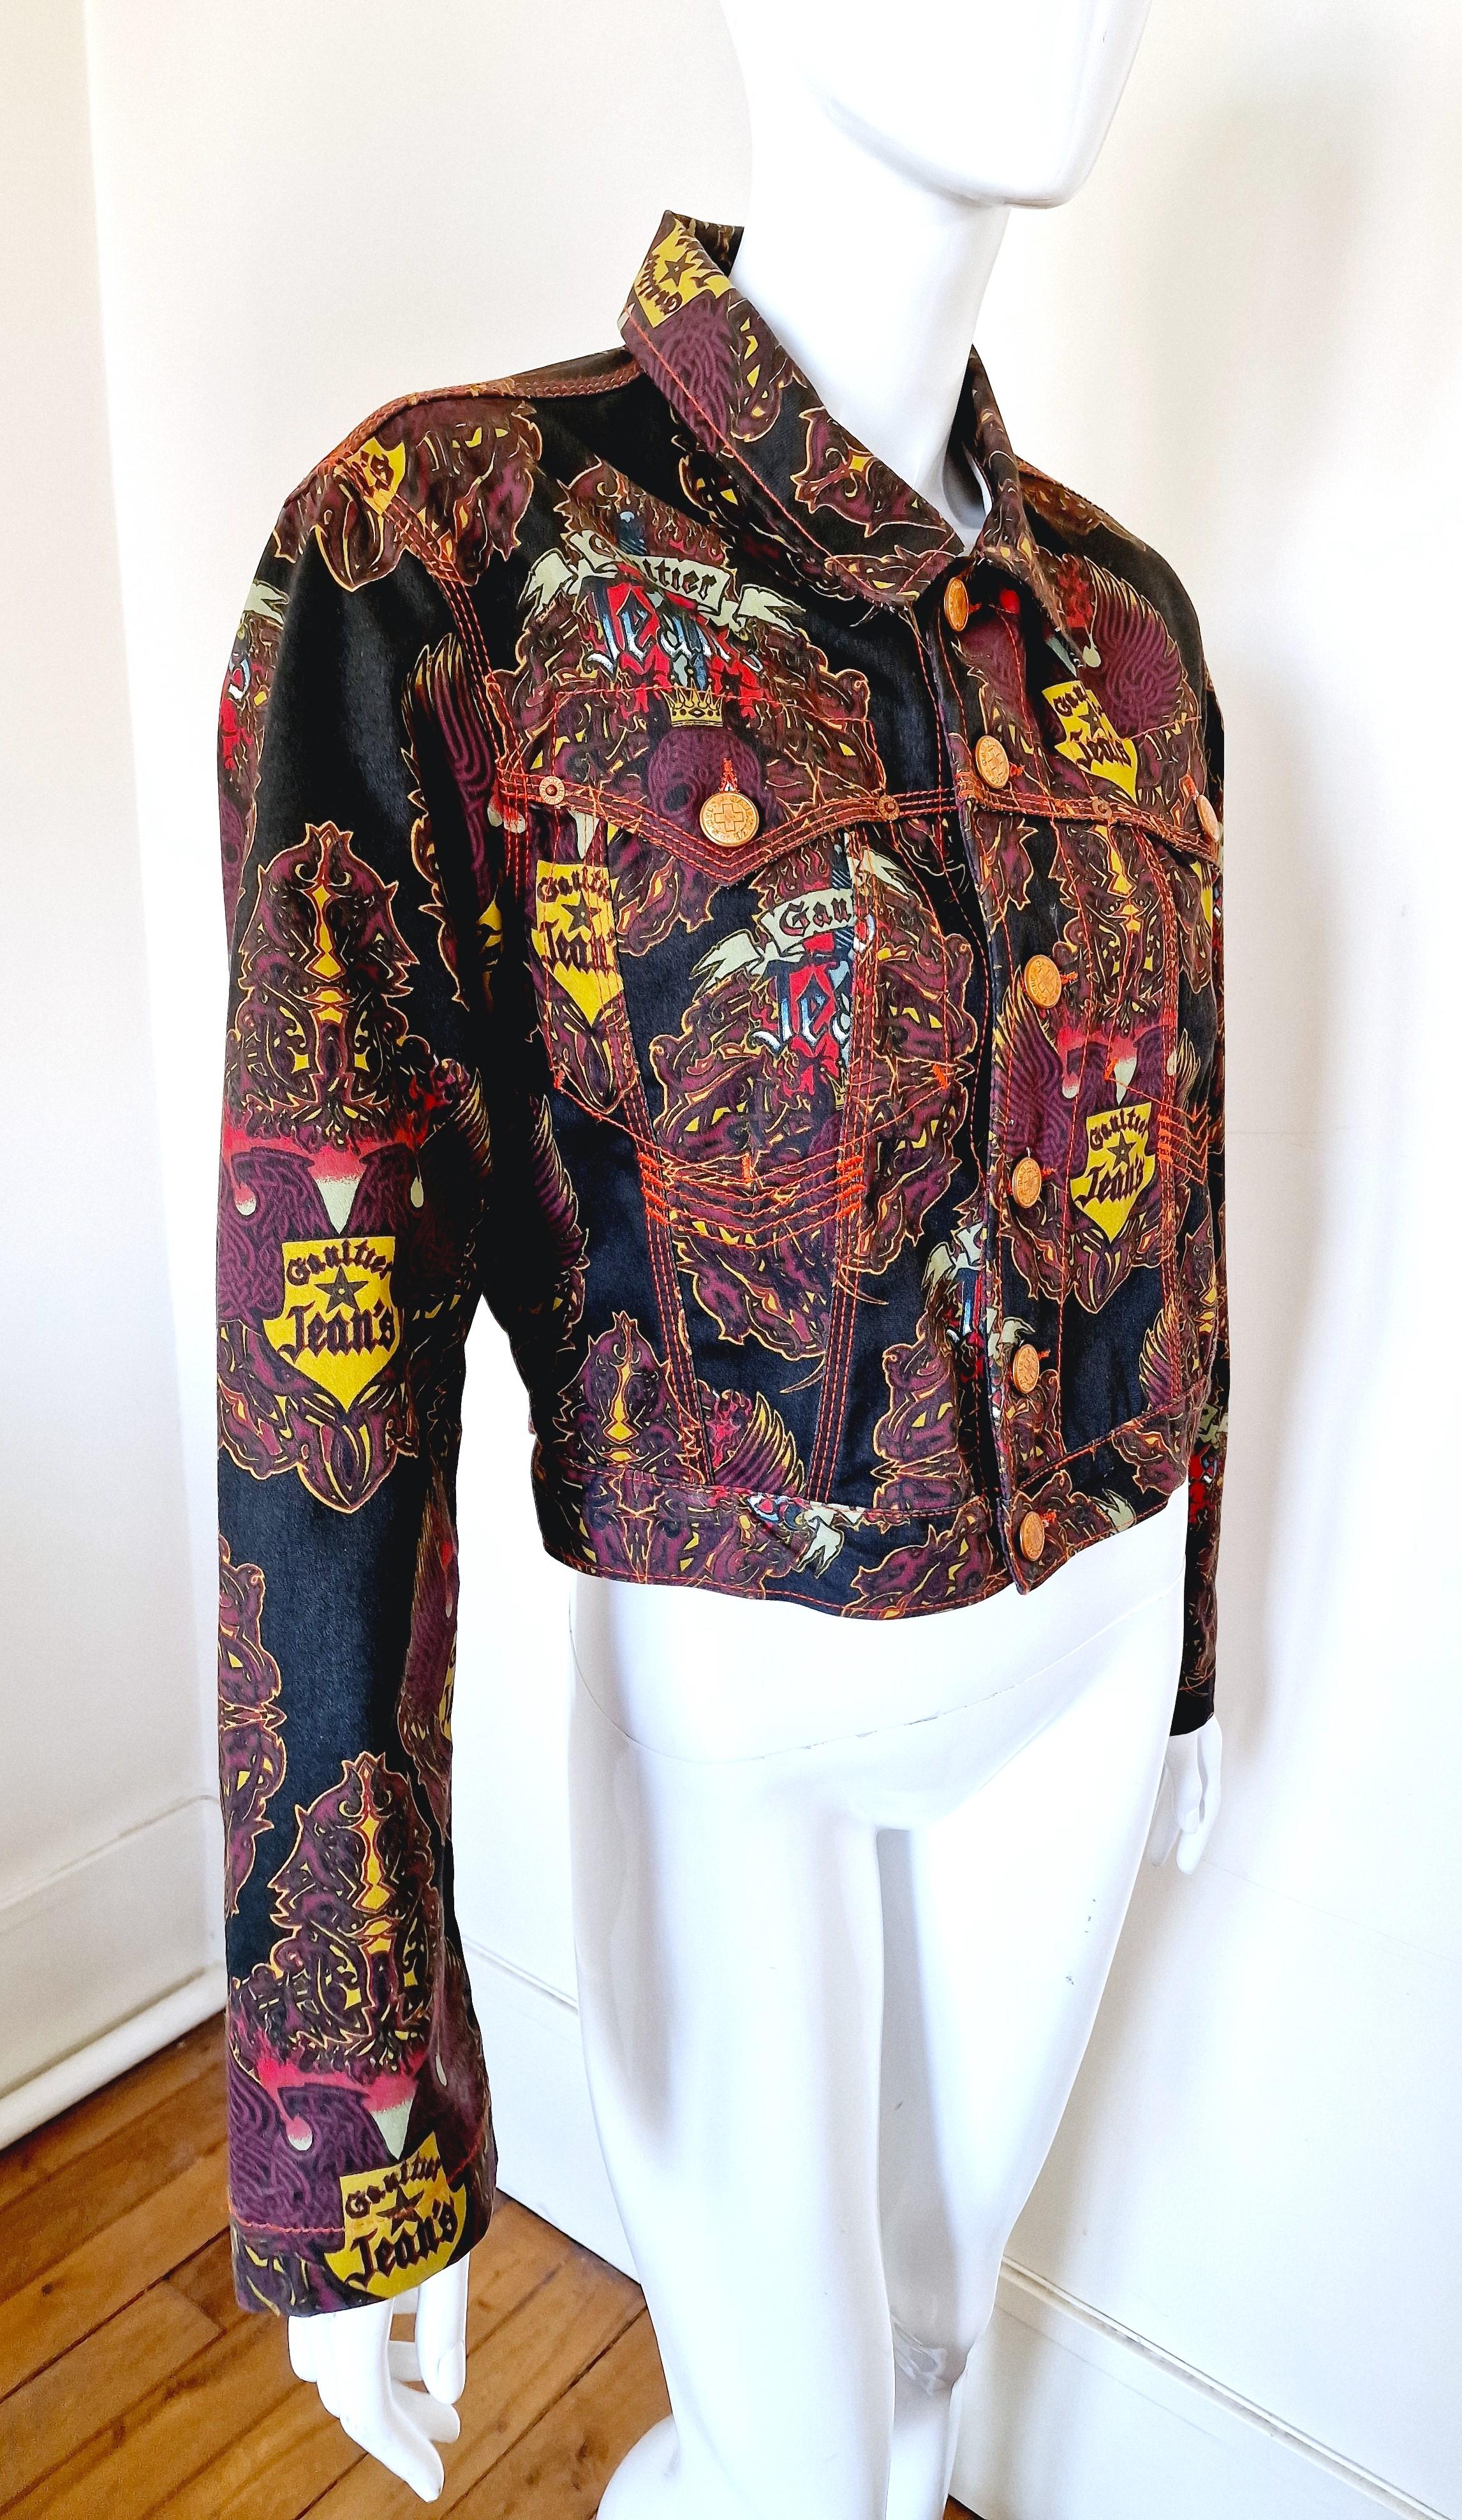 Tattoo crop jacket by Jean Paul Gaultier!
2 front pockets.
*GAULTIER JEANS* metal buttons.
2x5 buttons on the sleeves!
Orange sewing !

VERY GOOD condition!

SIZE
Marked size: M.
Women: medium.
Men: small.
Length: 47 cm / 18.5 inch
Bust: 47 cm /